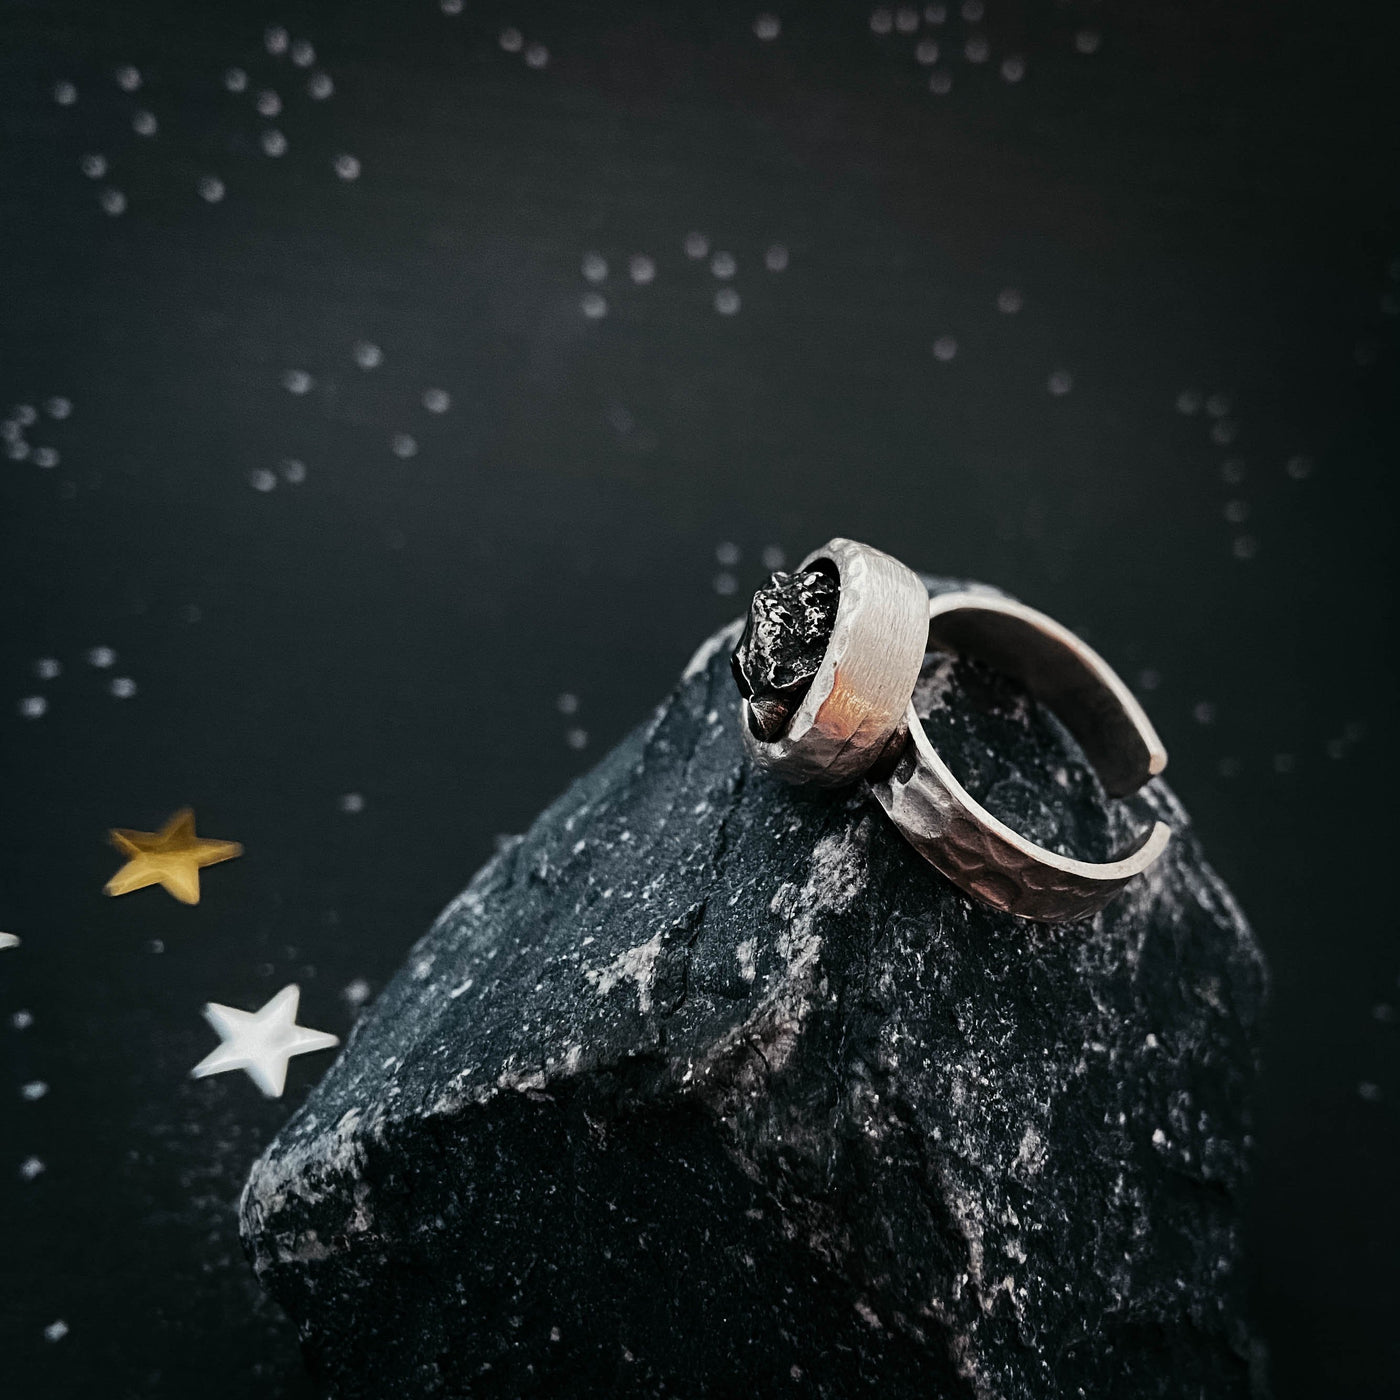 Chunky Round Raw Meteorite Ring in Silver - Roses & Chains | Fashionable Clothing, Shoes, Accessories, & More